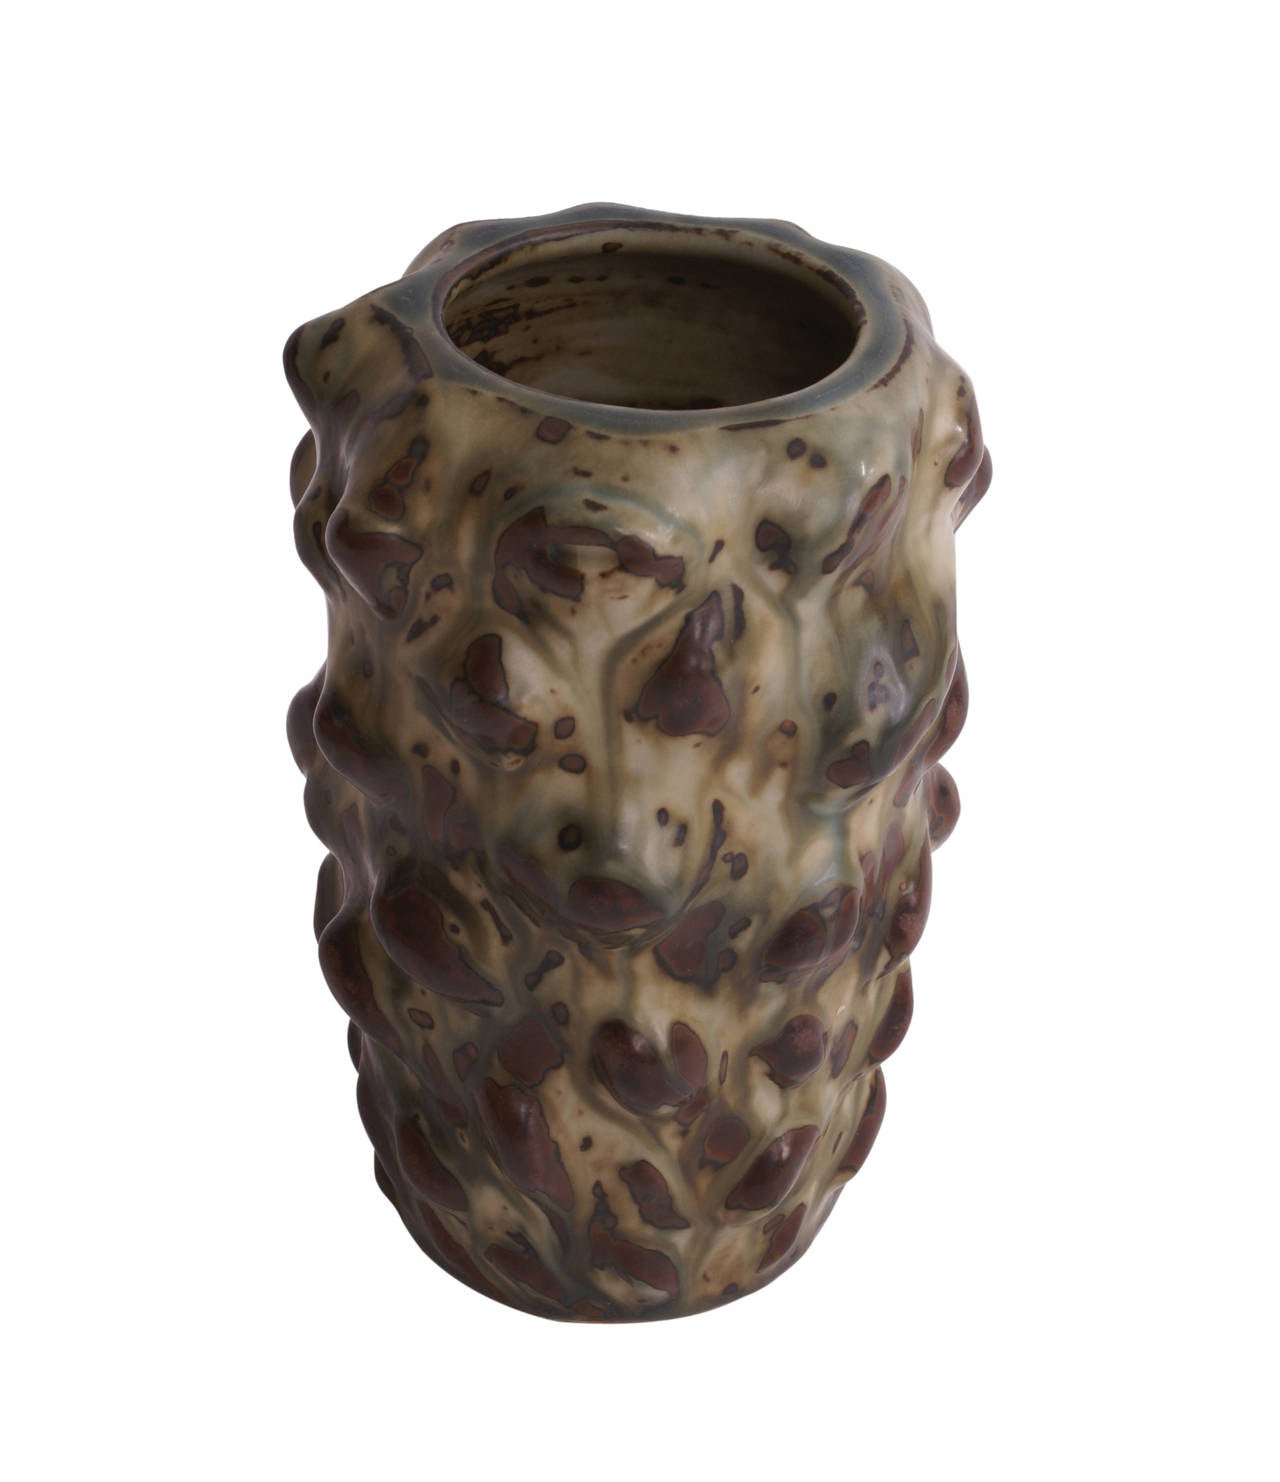 Axel Salto vase in budded style with sung glaze. Made by Royal Copenhagen. Marked 